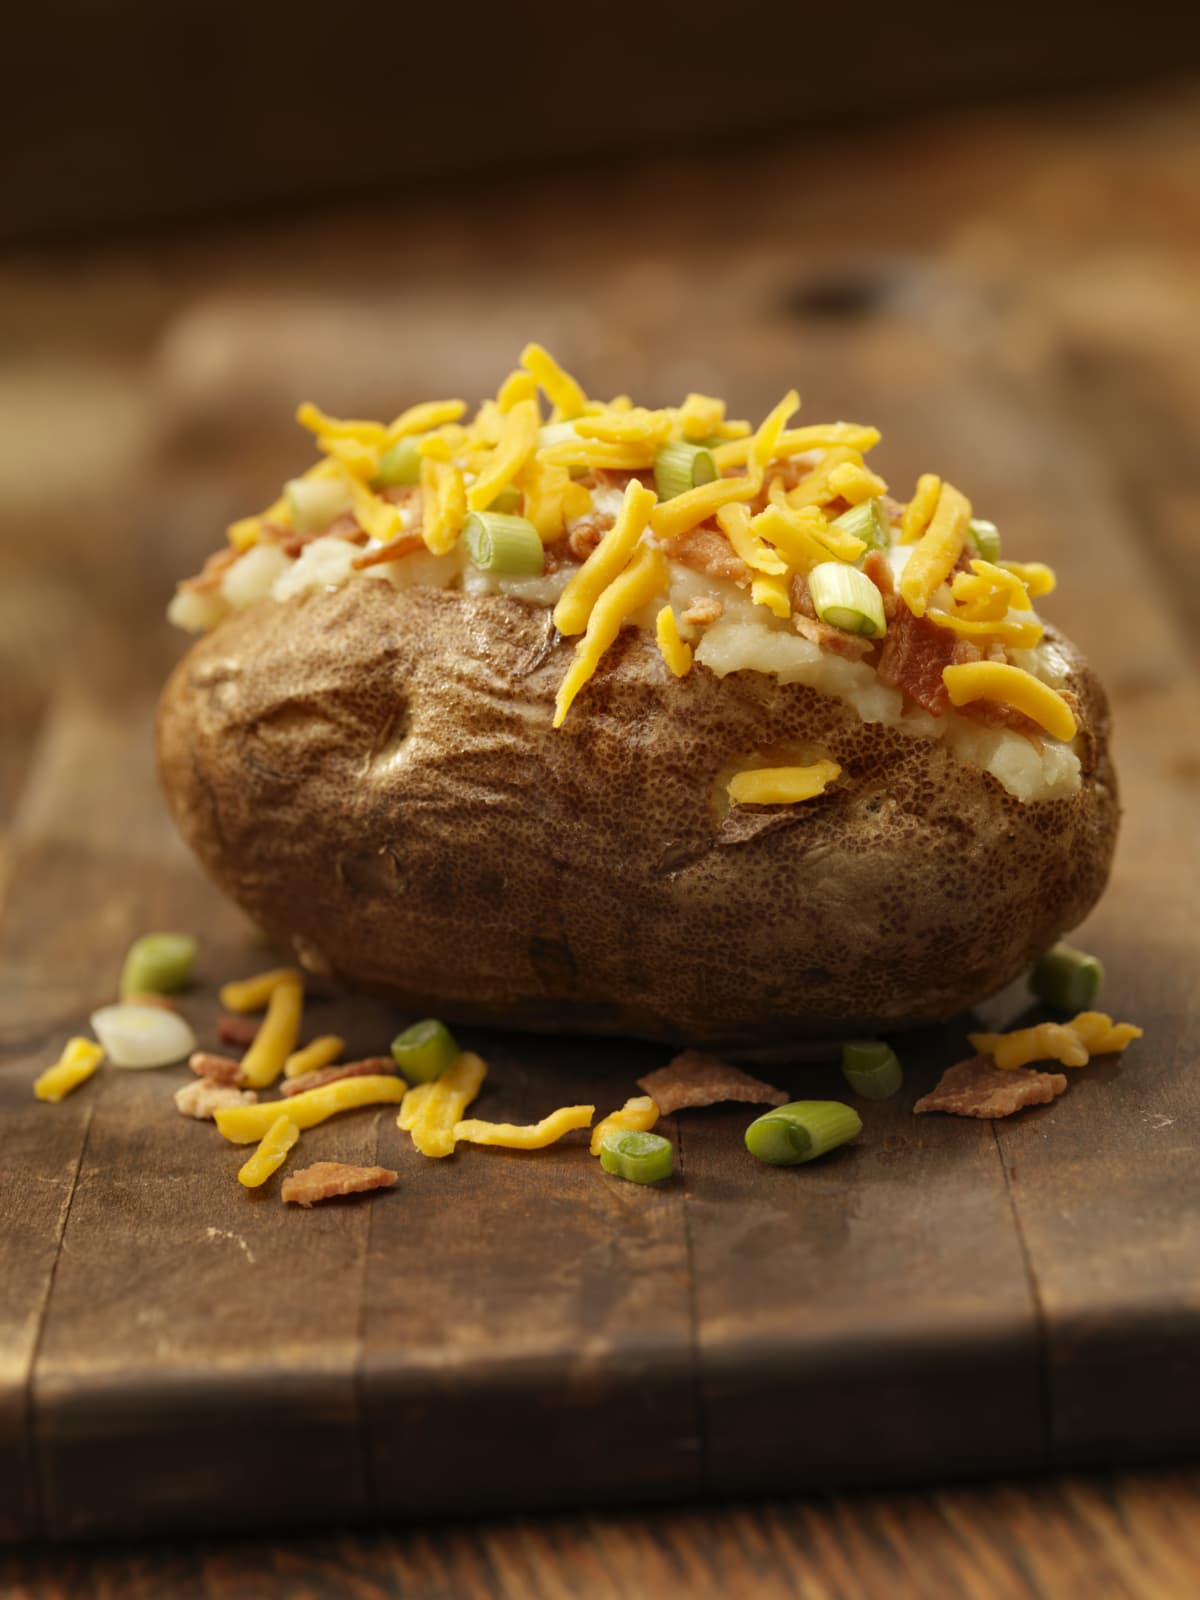 Baked potato topped with bacon, sour cream, green onions, and cheddar cheese on cutting board